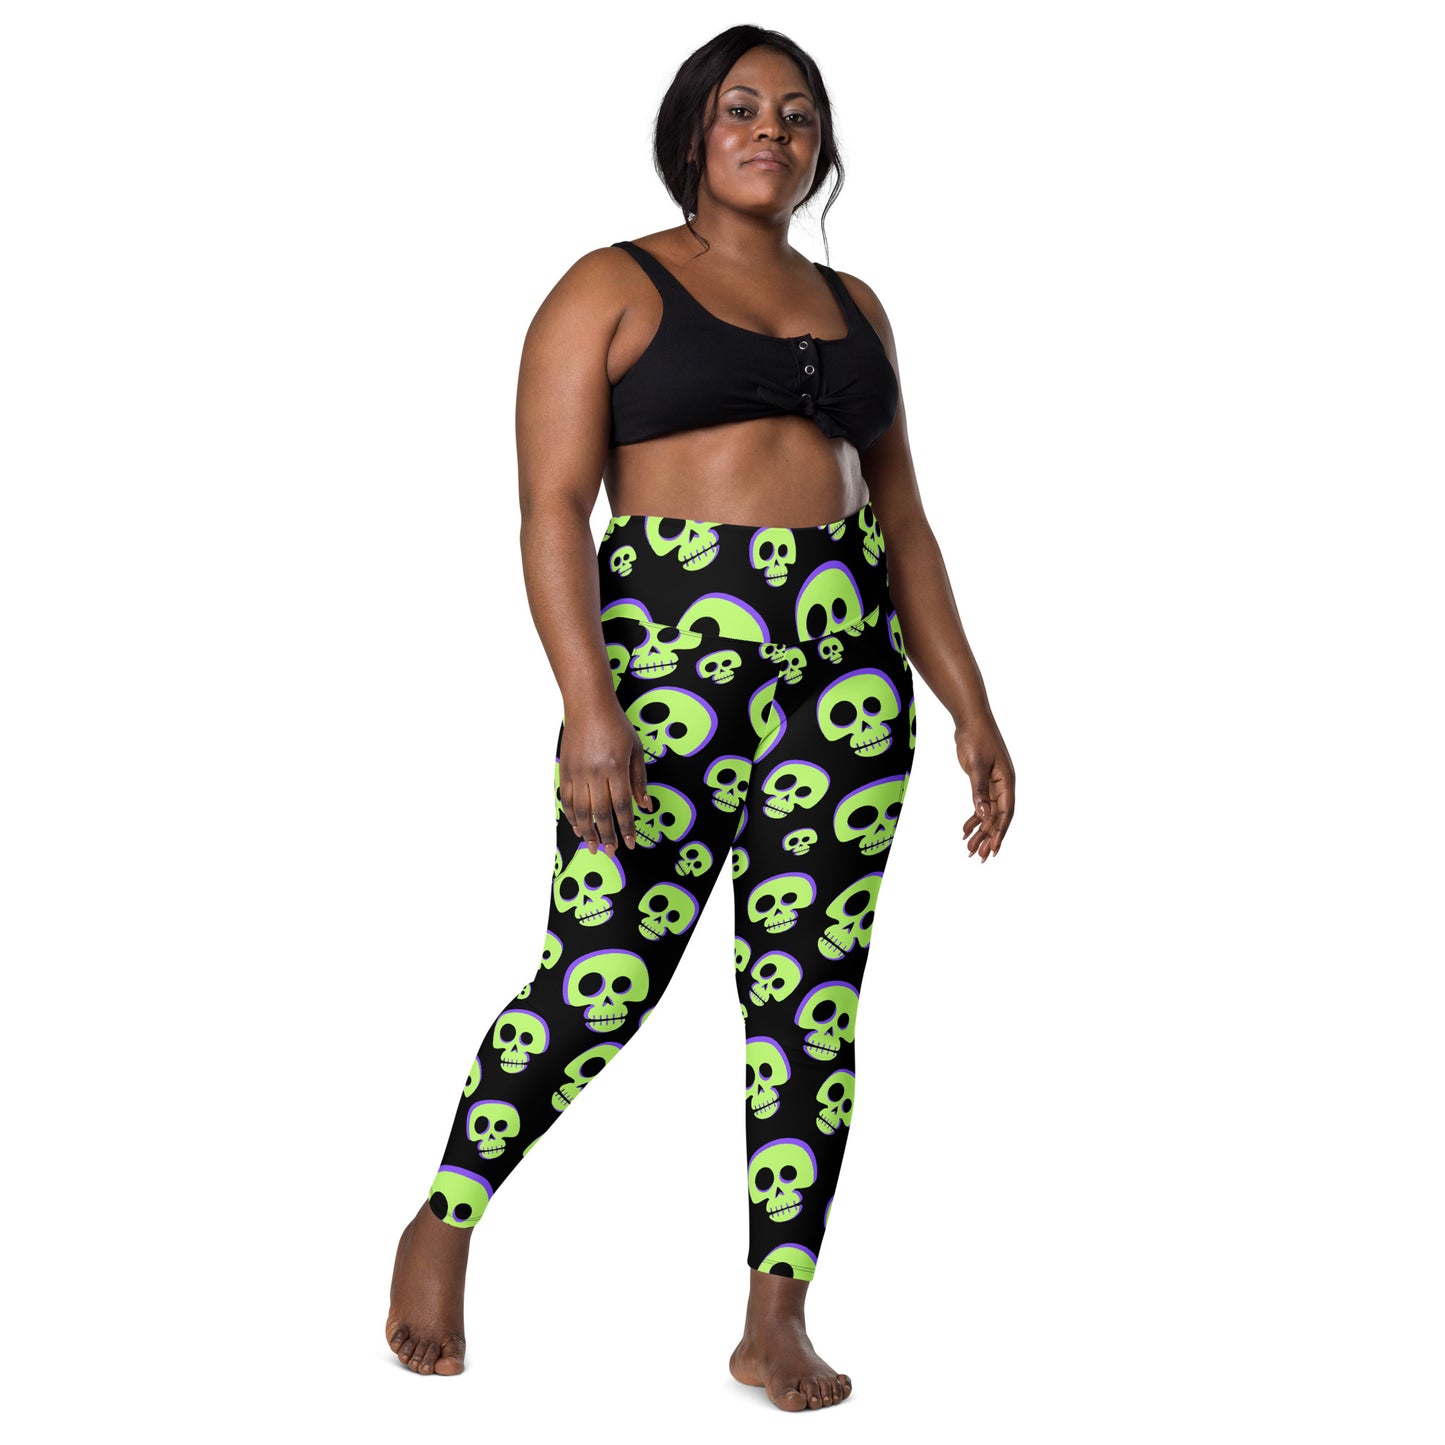 "The Zombie" Leggings with pockets